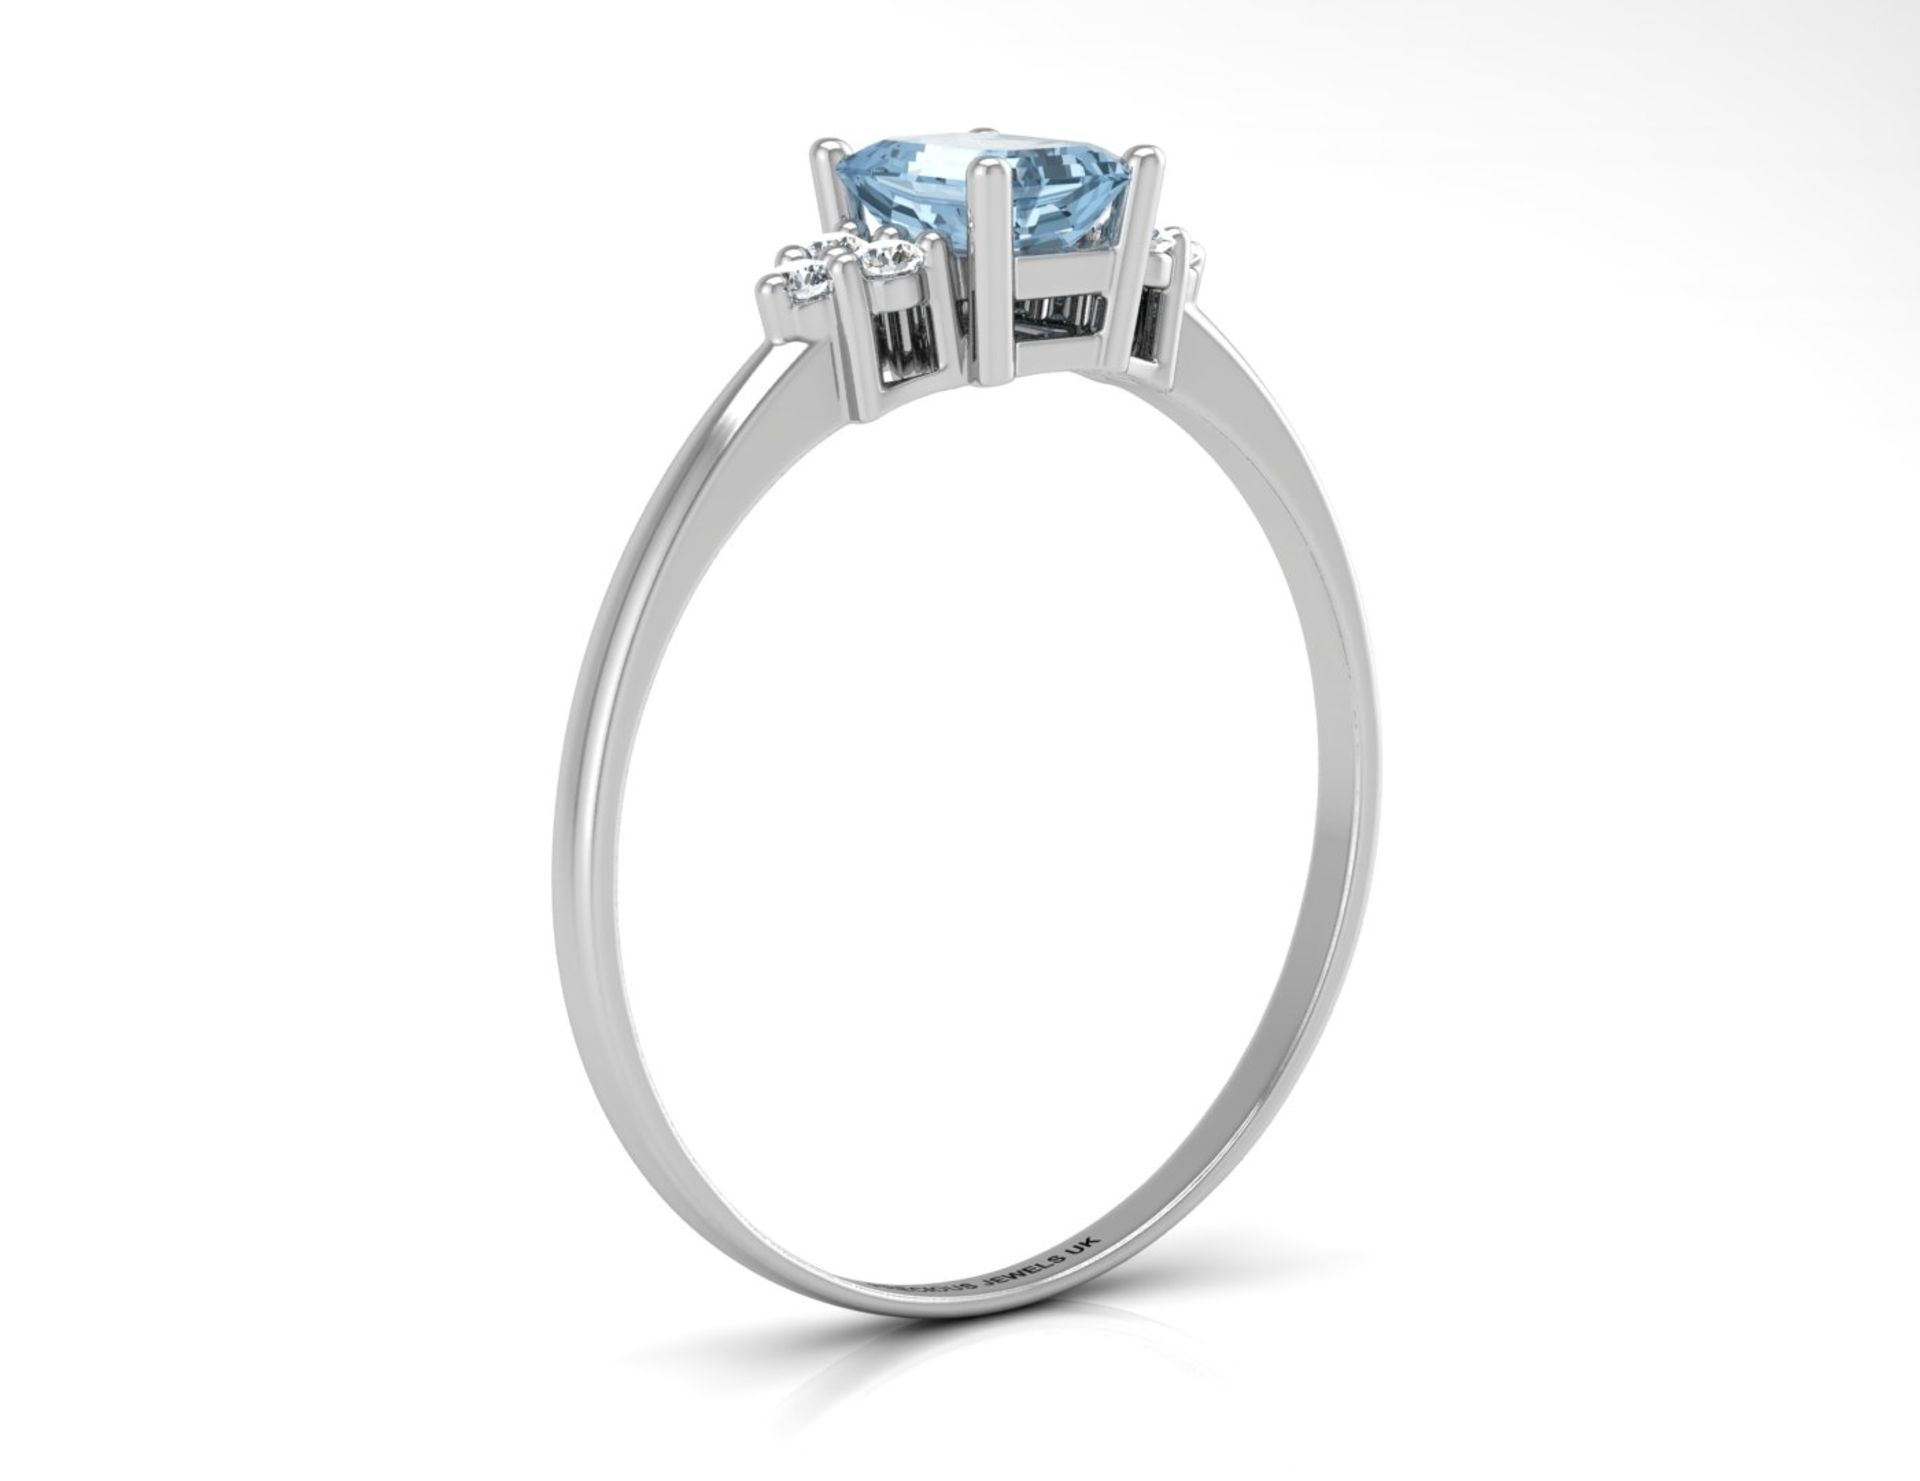 9ct White Gold Fancy Cluster Diamond Blue Topaz Ring 0.06 Carats - Valued by GIE £1,075.00 - An - Image 2 of 5